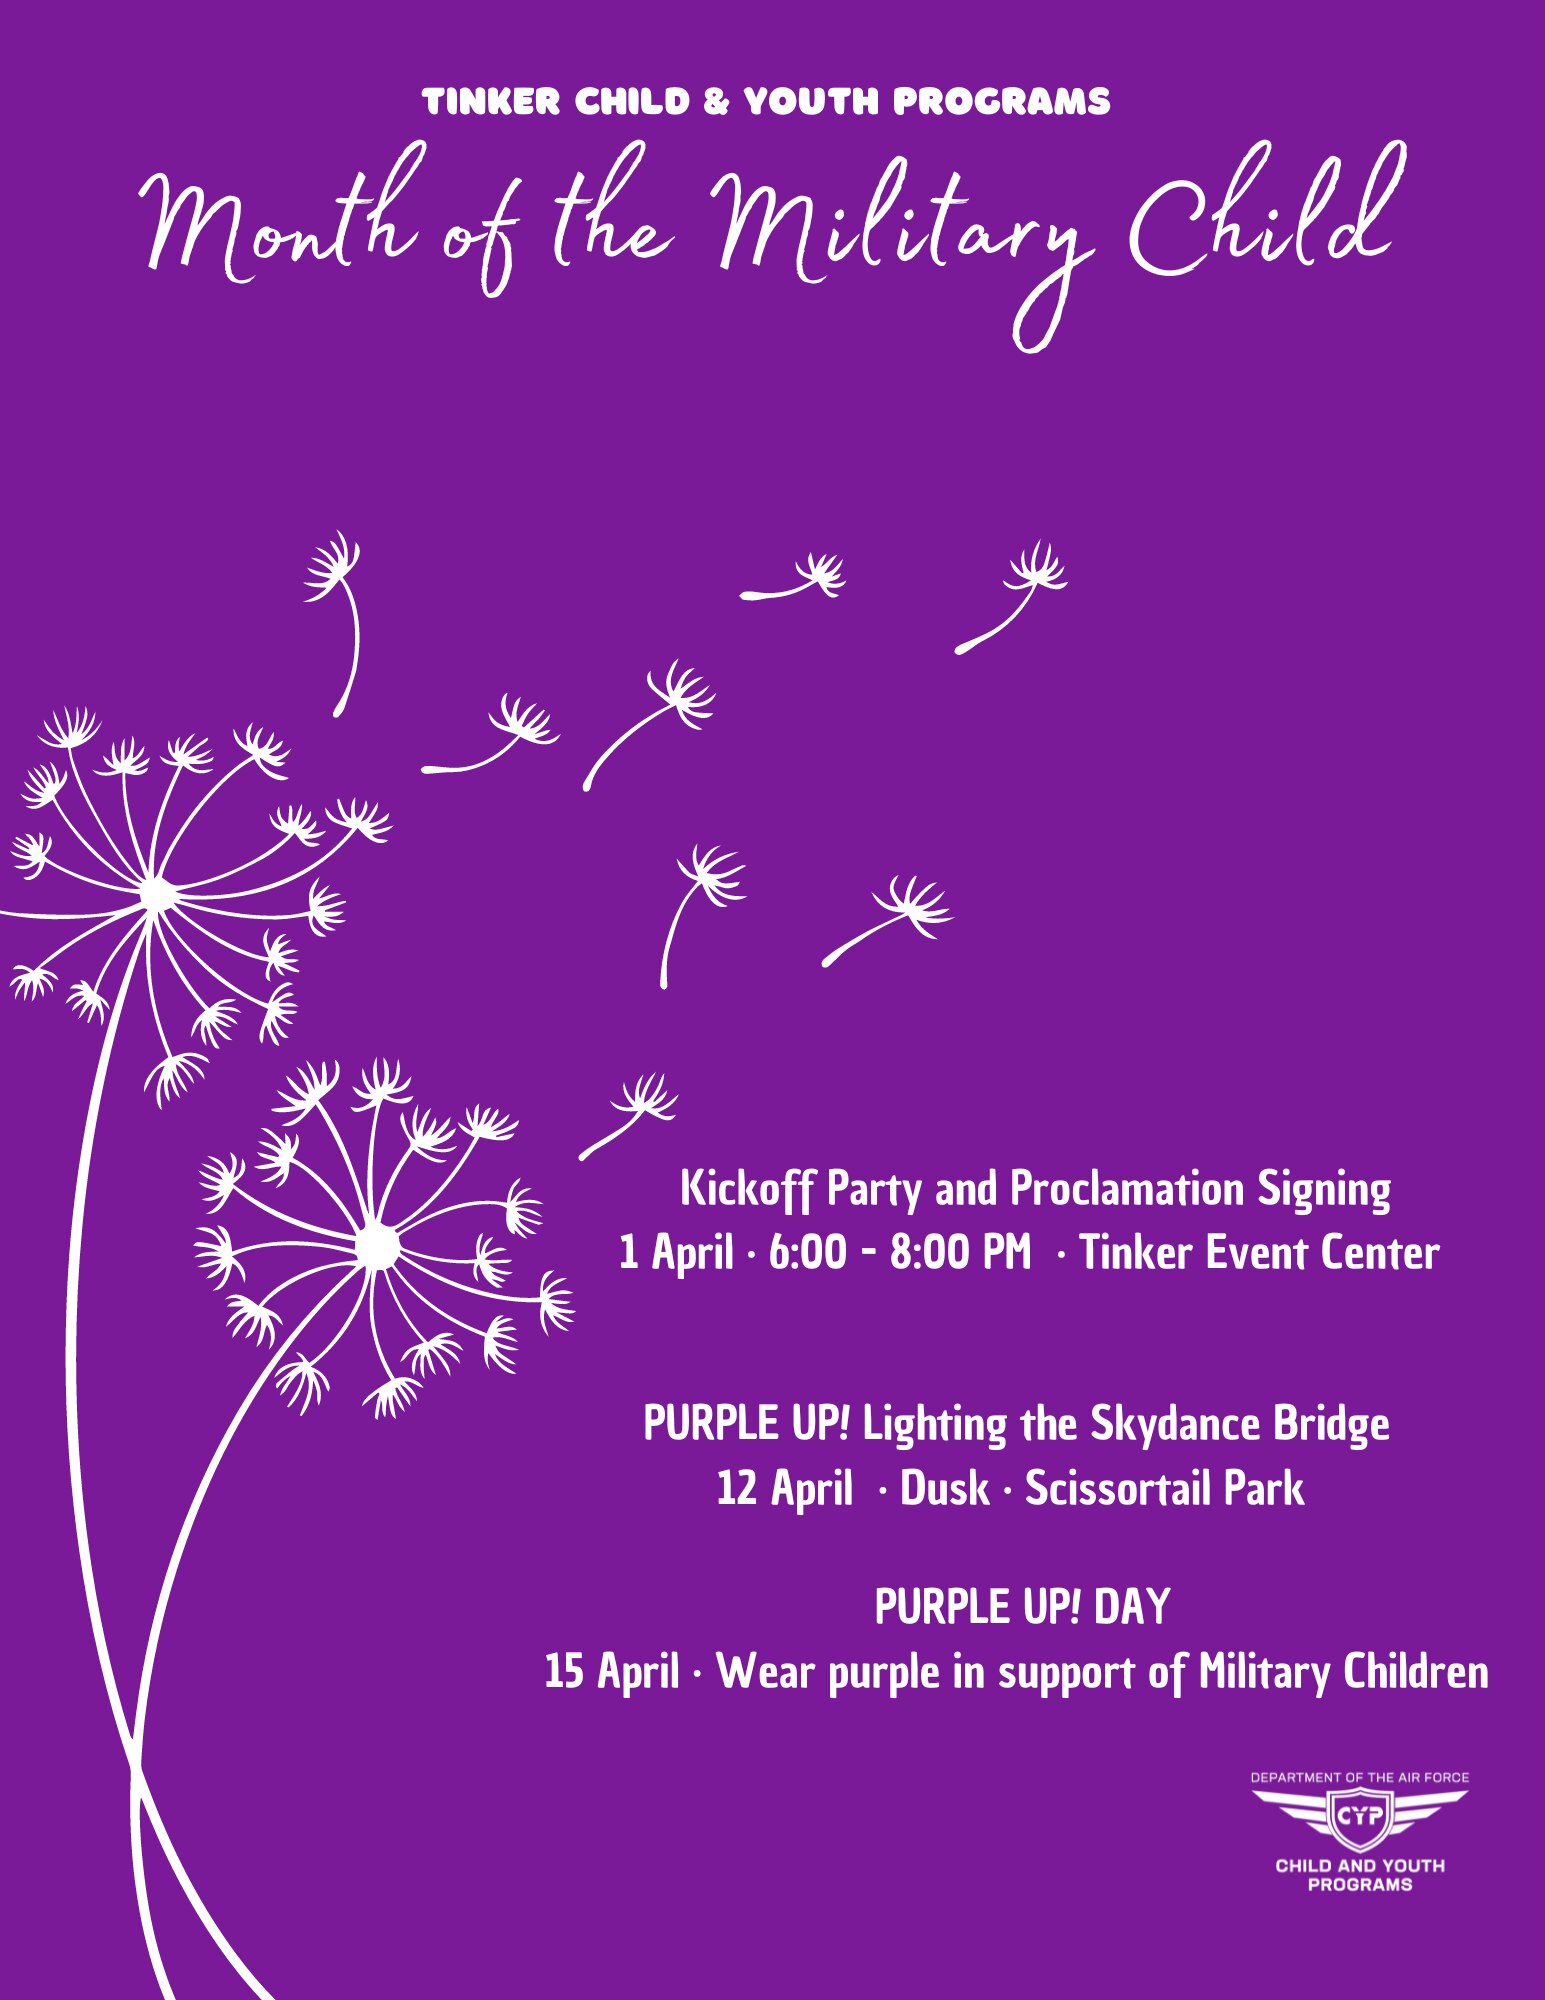 Flyer listing Month of the Military Child events.